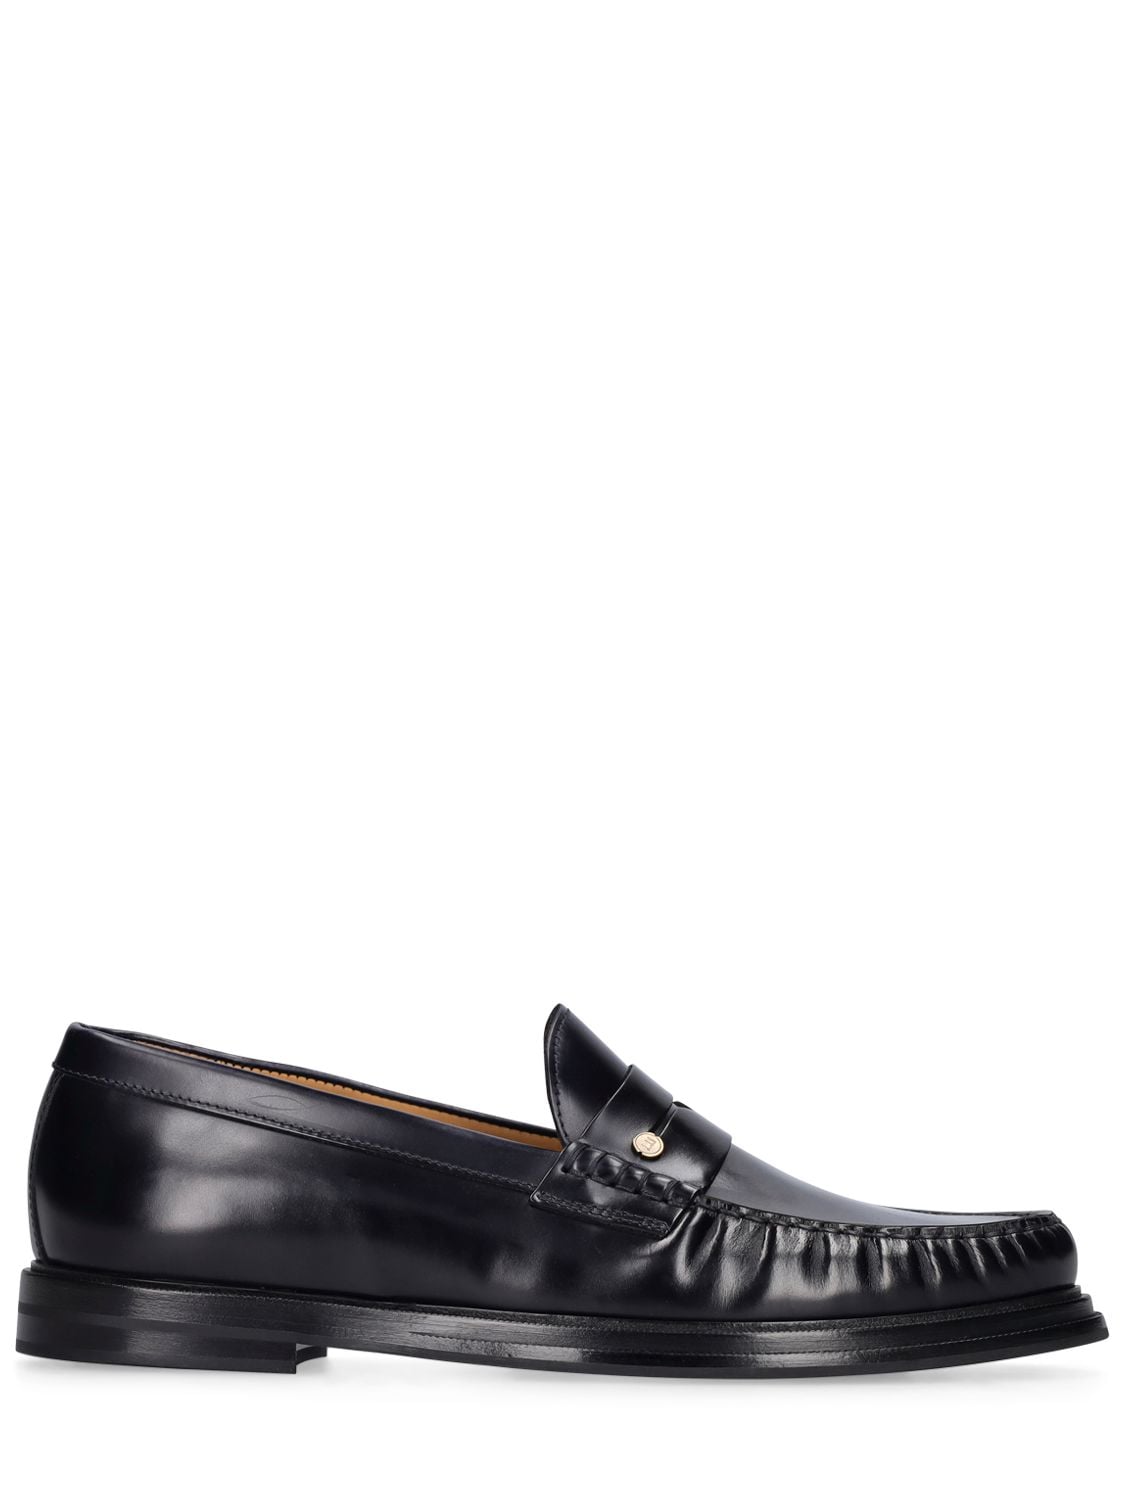 DUNHILL RIVET LOAFERS